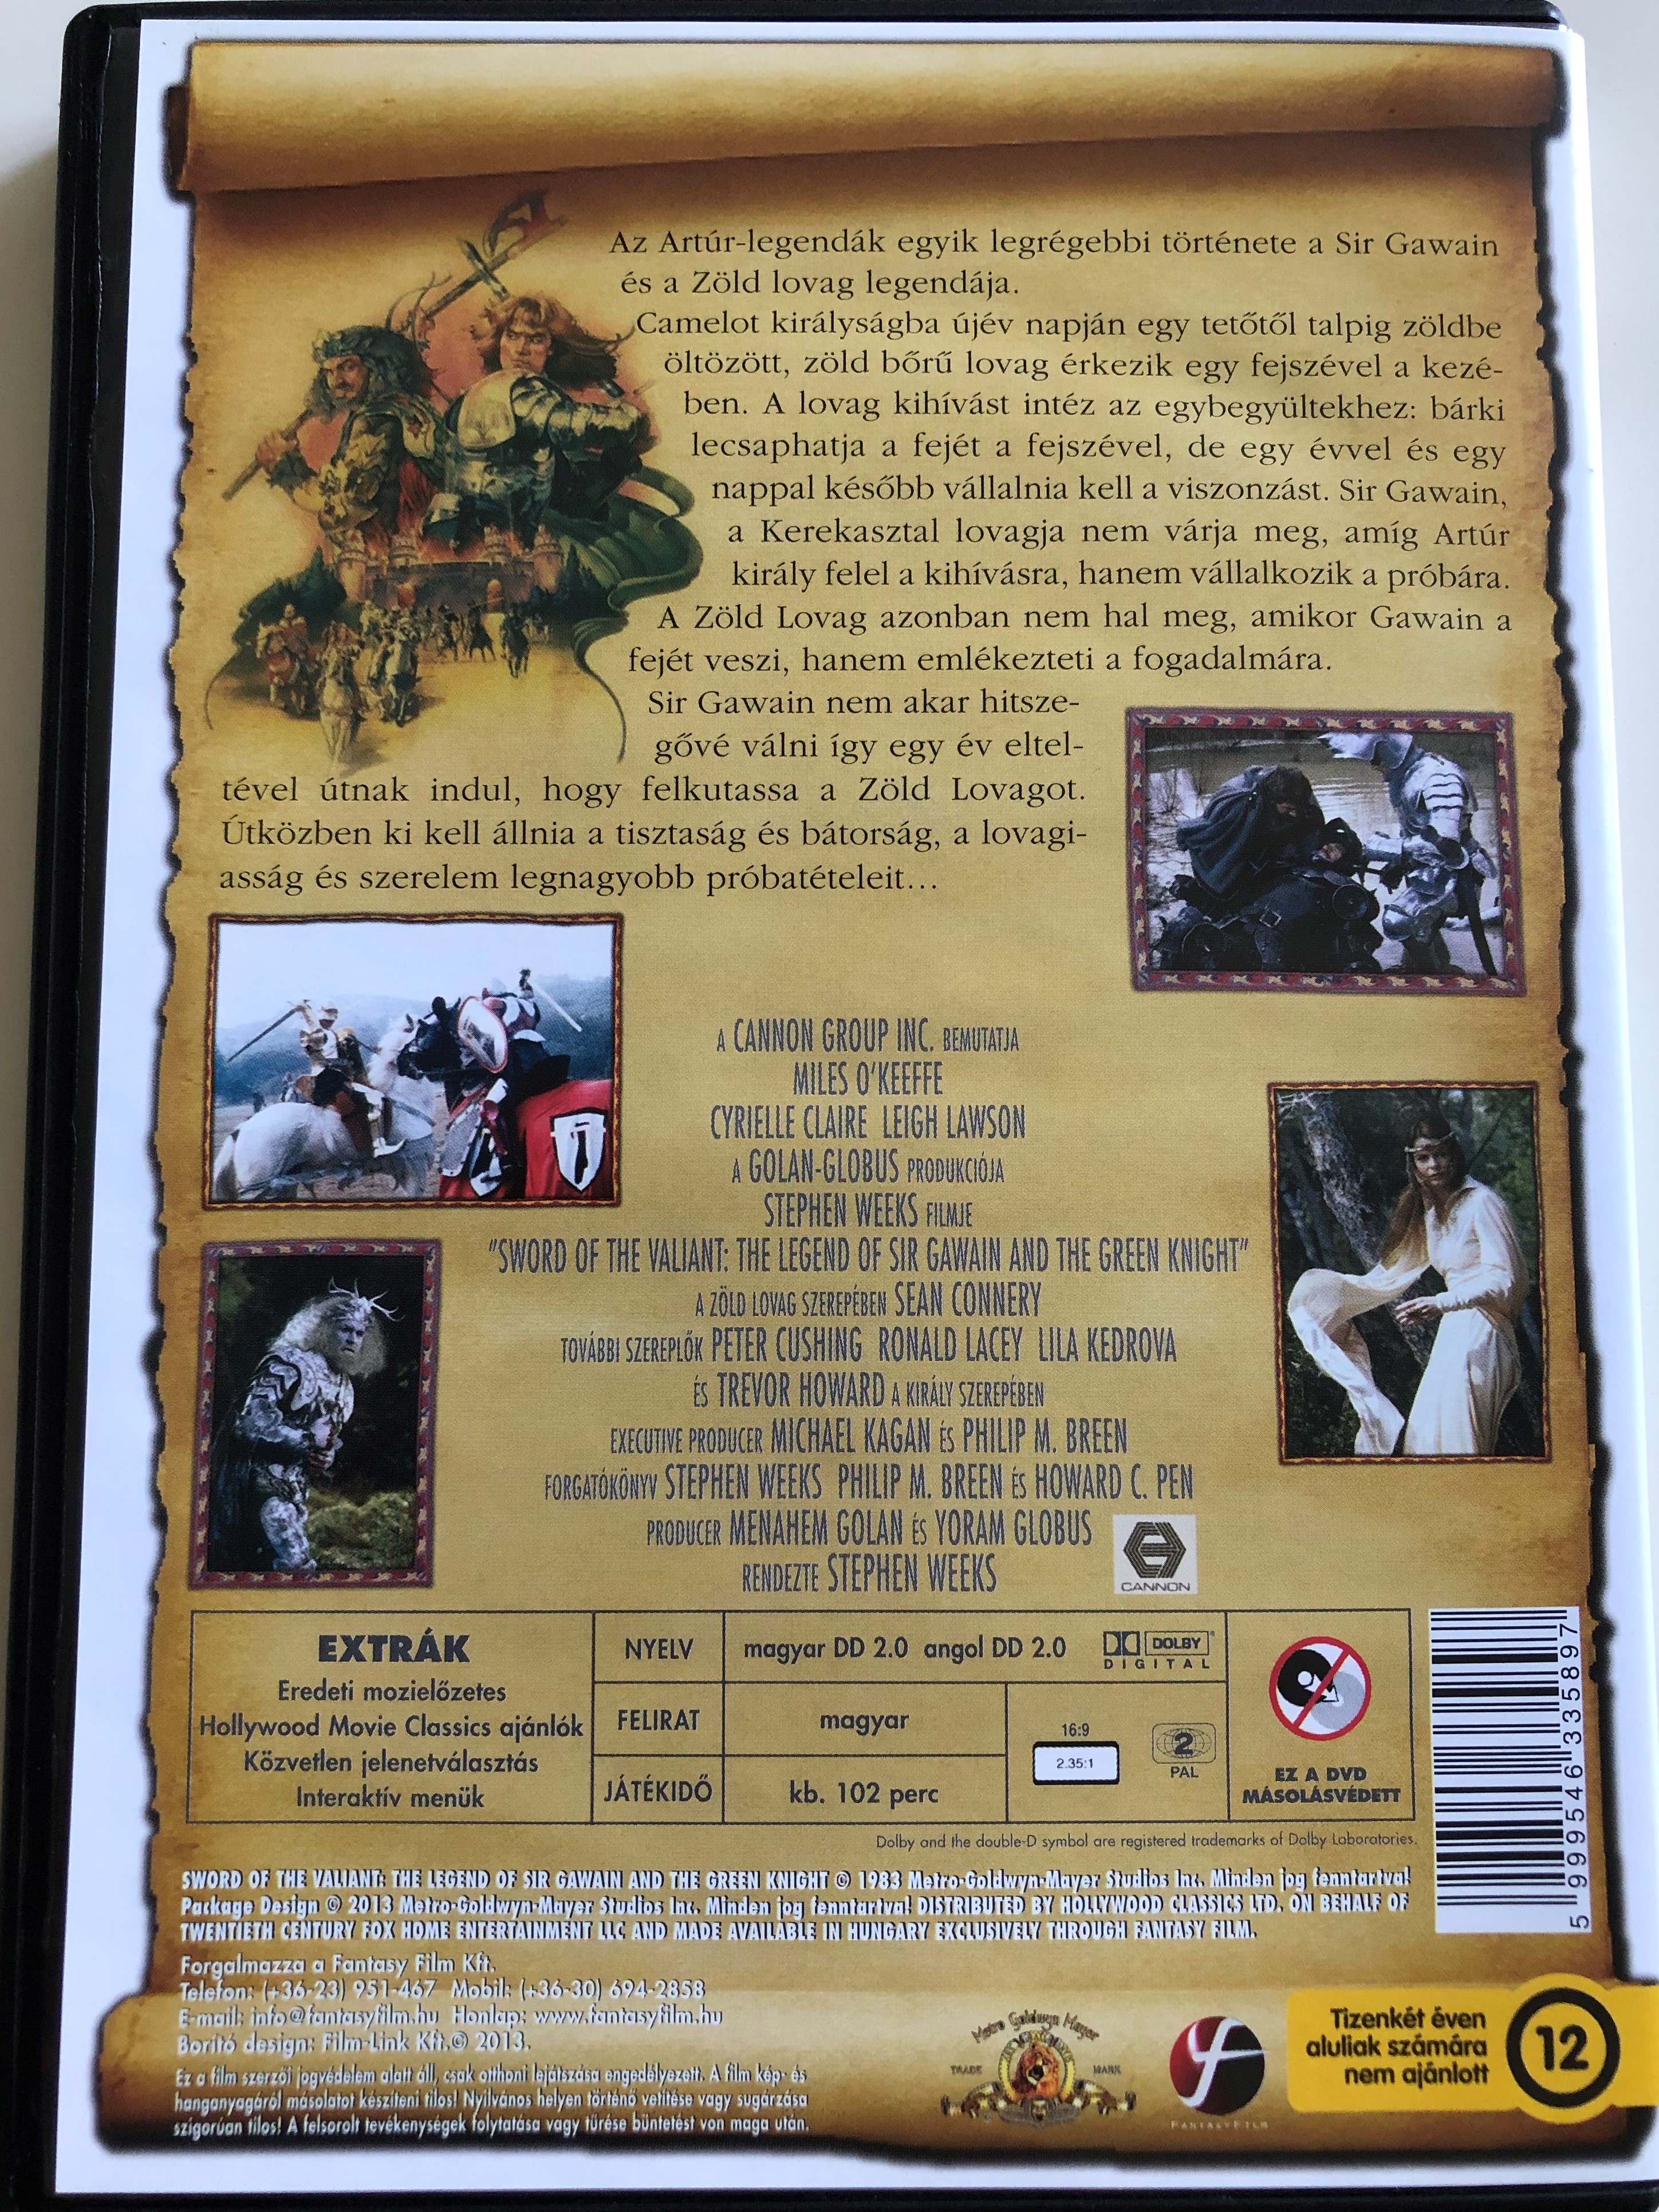 Sword of the valiant: The Legend of Sir Gawain and the green knight DVD  1983 Camelot Gawain és a Zöld Lovag / Directed by Stephen Weeks / Starring:  Sean Connery, Peter Cushing,